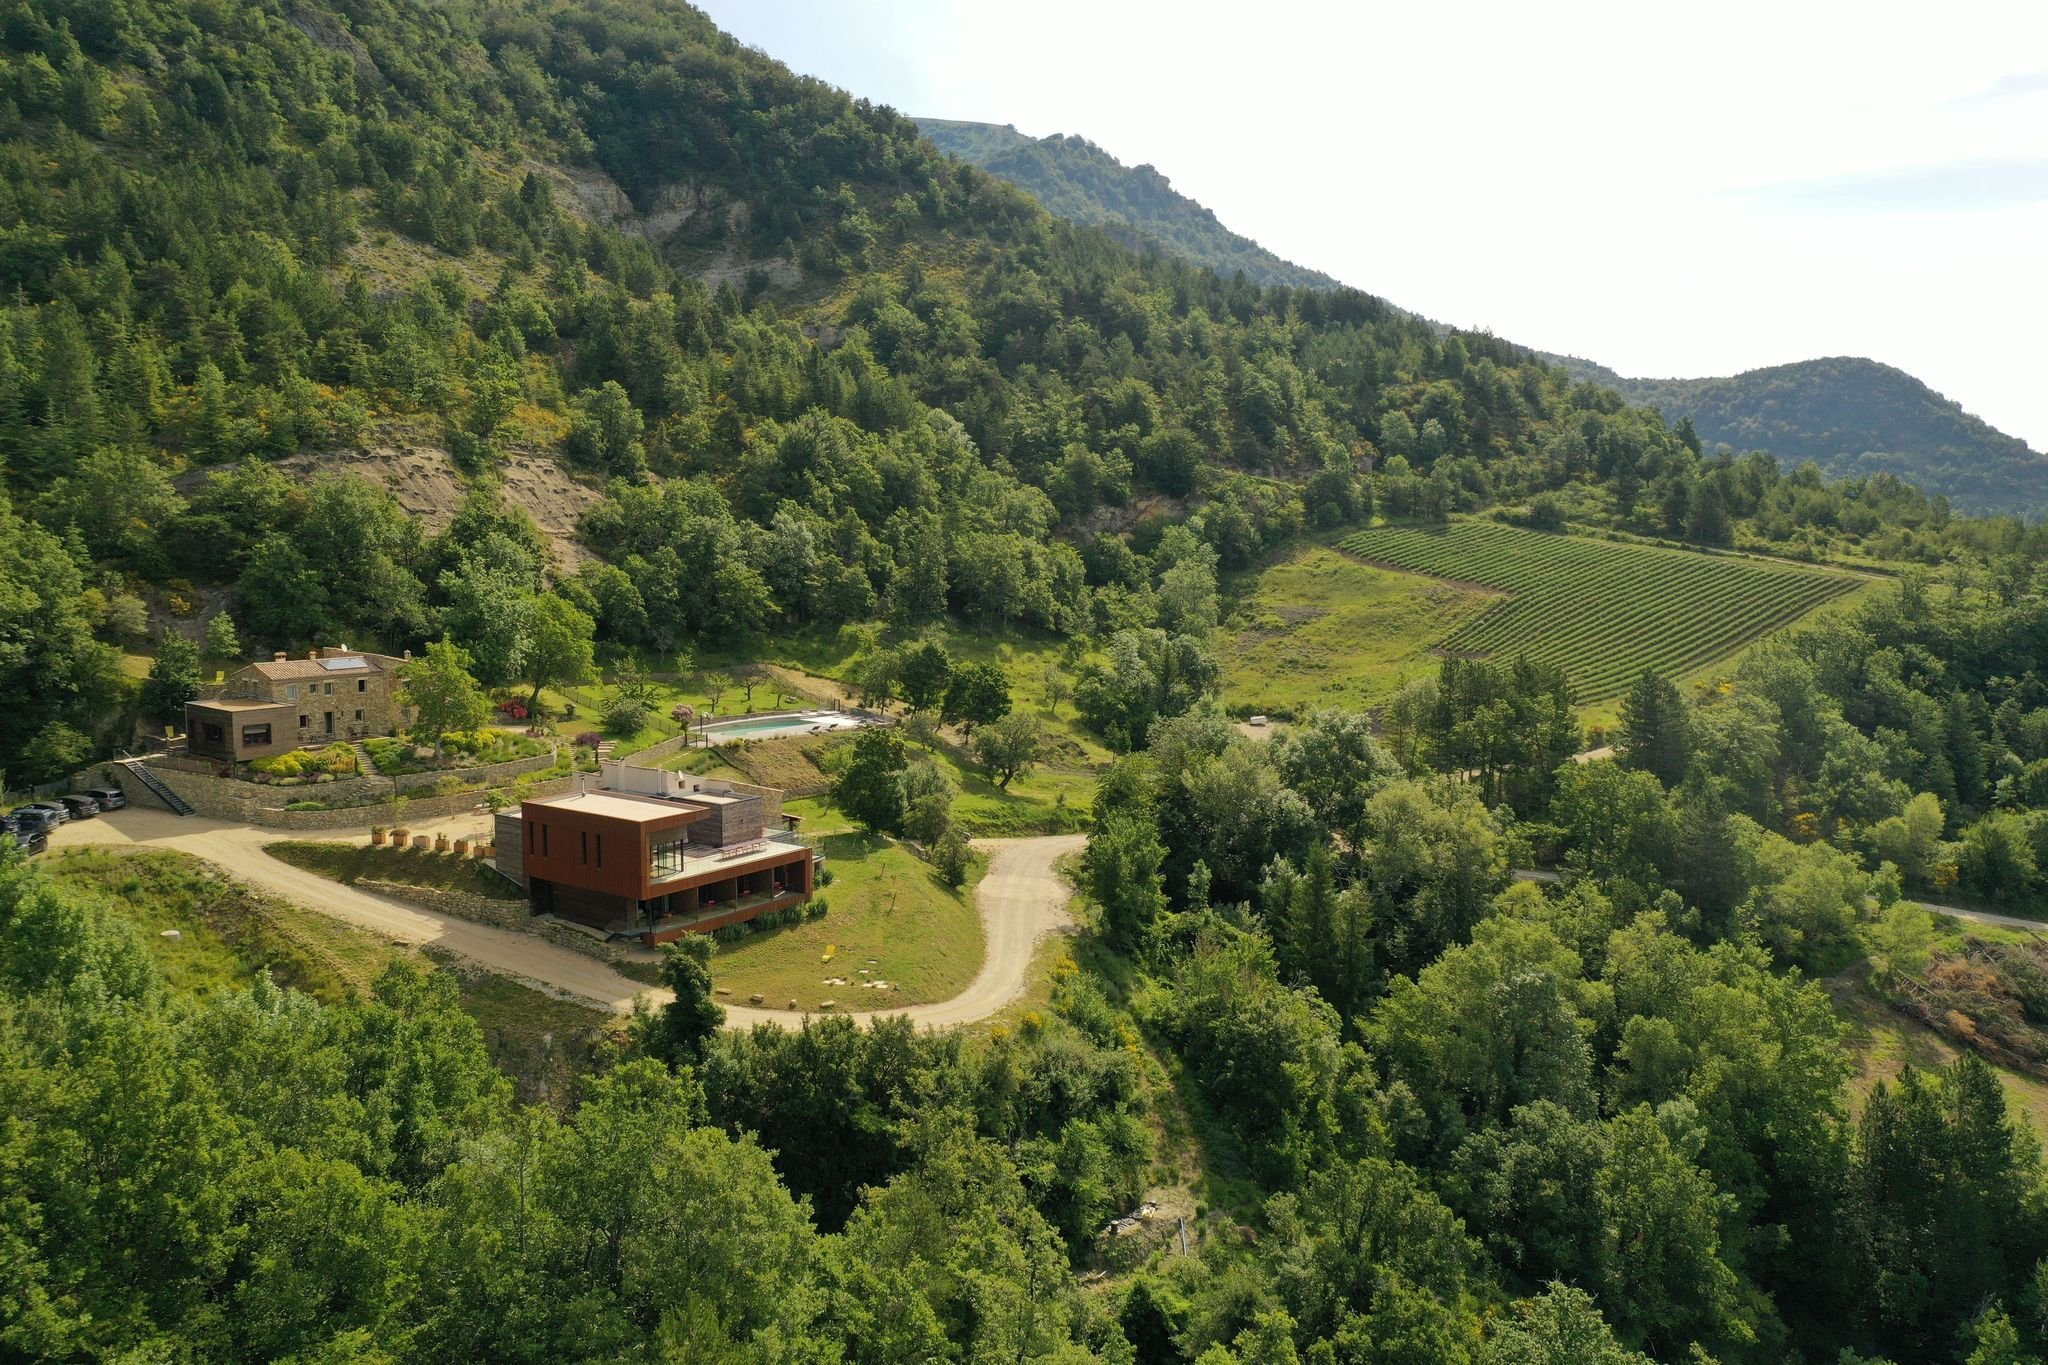 Luxury, eco-friendly domain to organize your seminar in Drôme provençale in the South of France